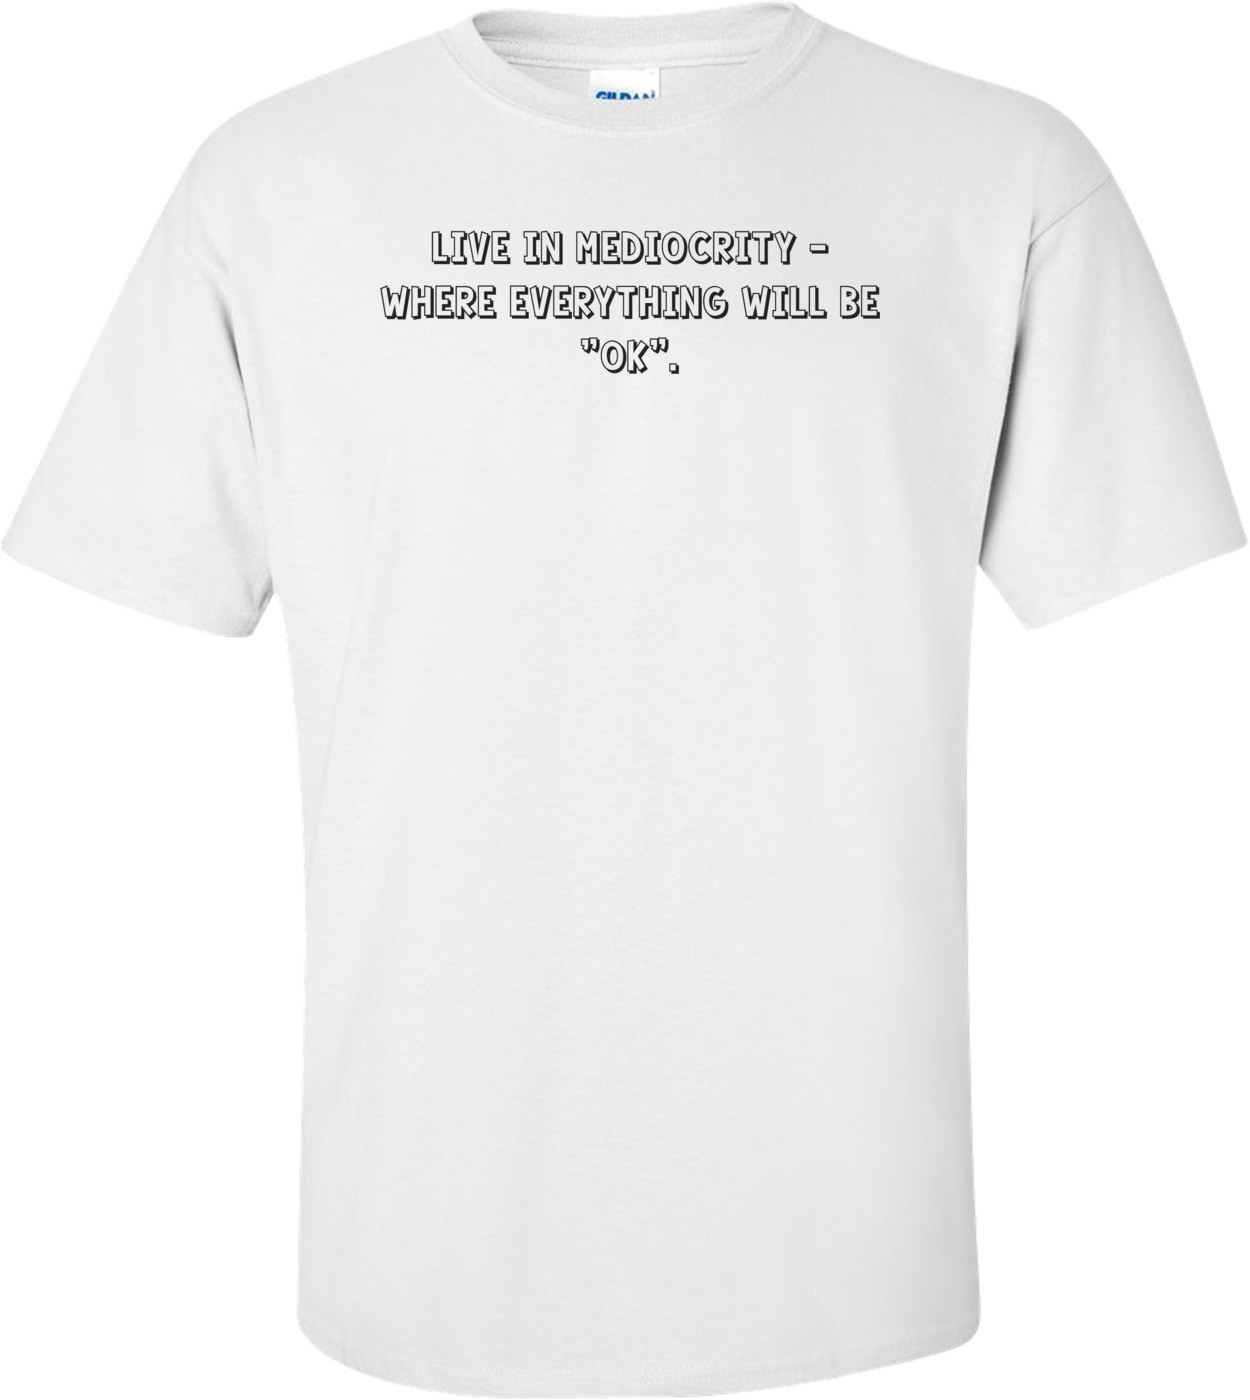 Live in mediocrity - where everything will be "ok". Shirt